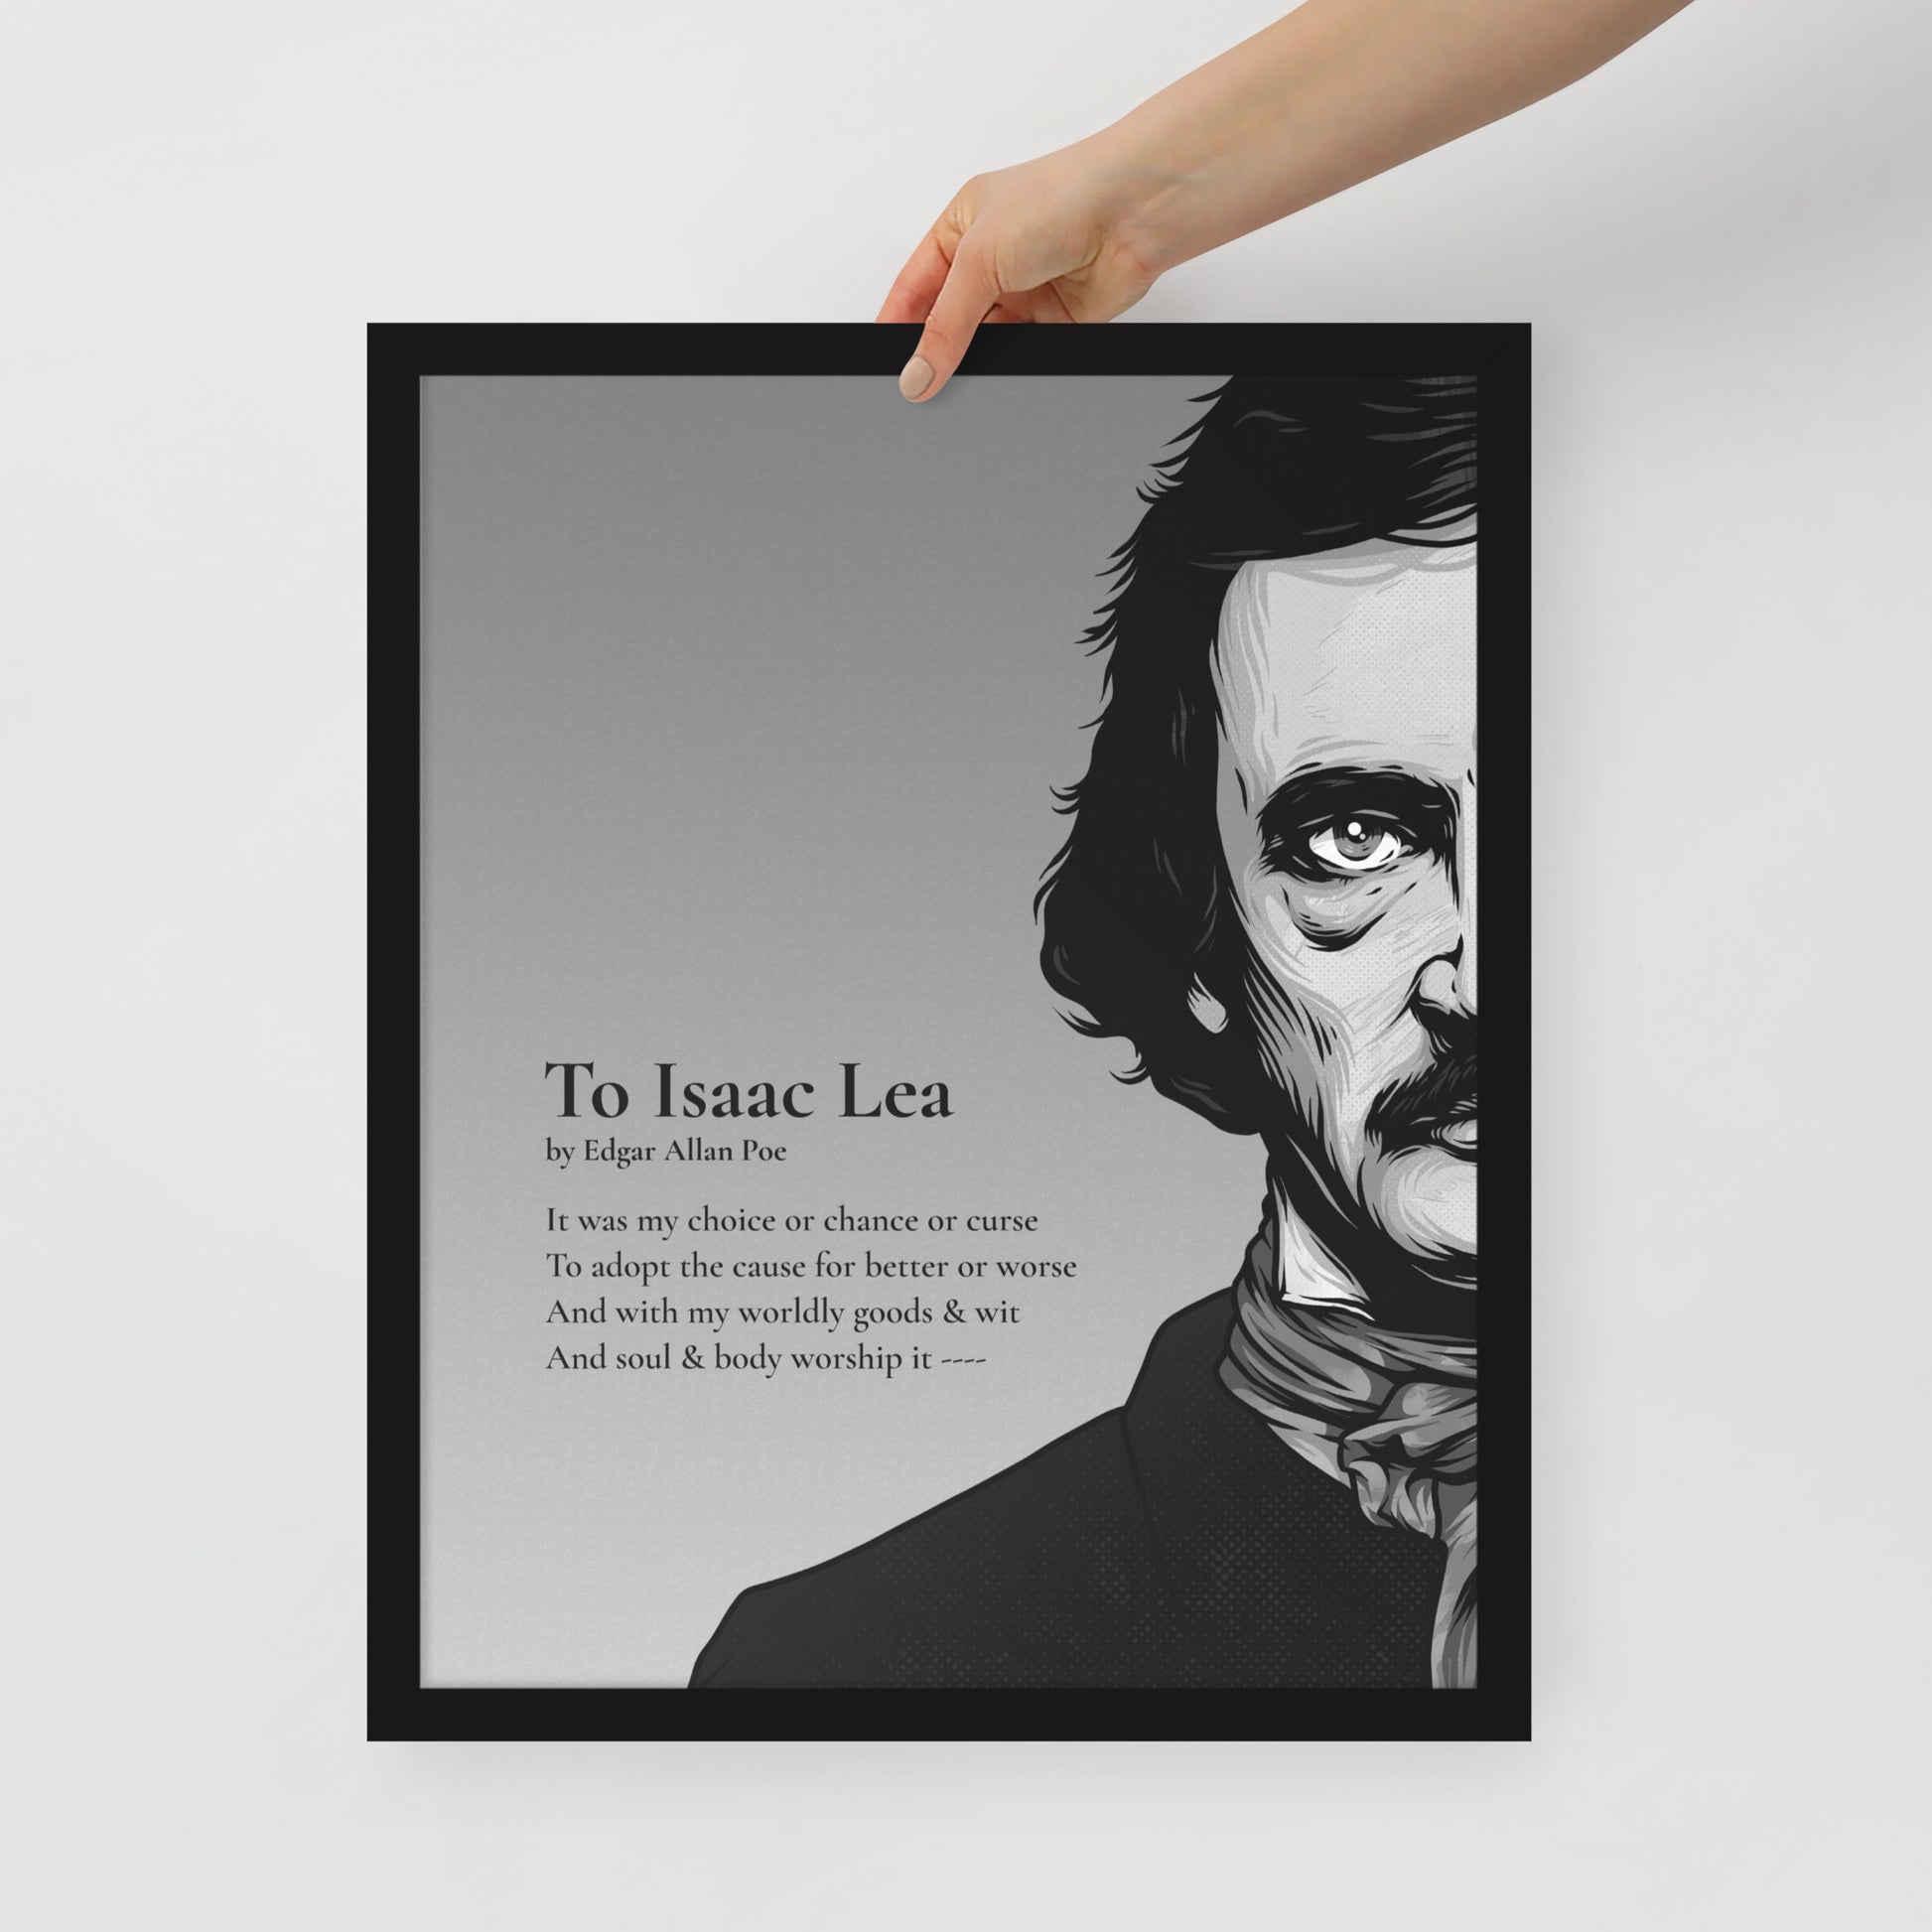 Edgar Allan Poe's 'To Isaac Lea' Framed Matted Poster - 16 x 20 Black Frame